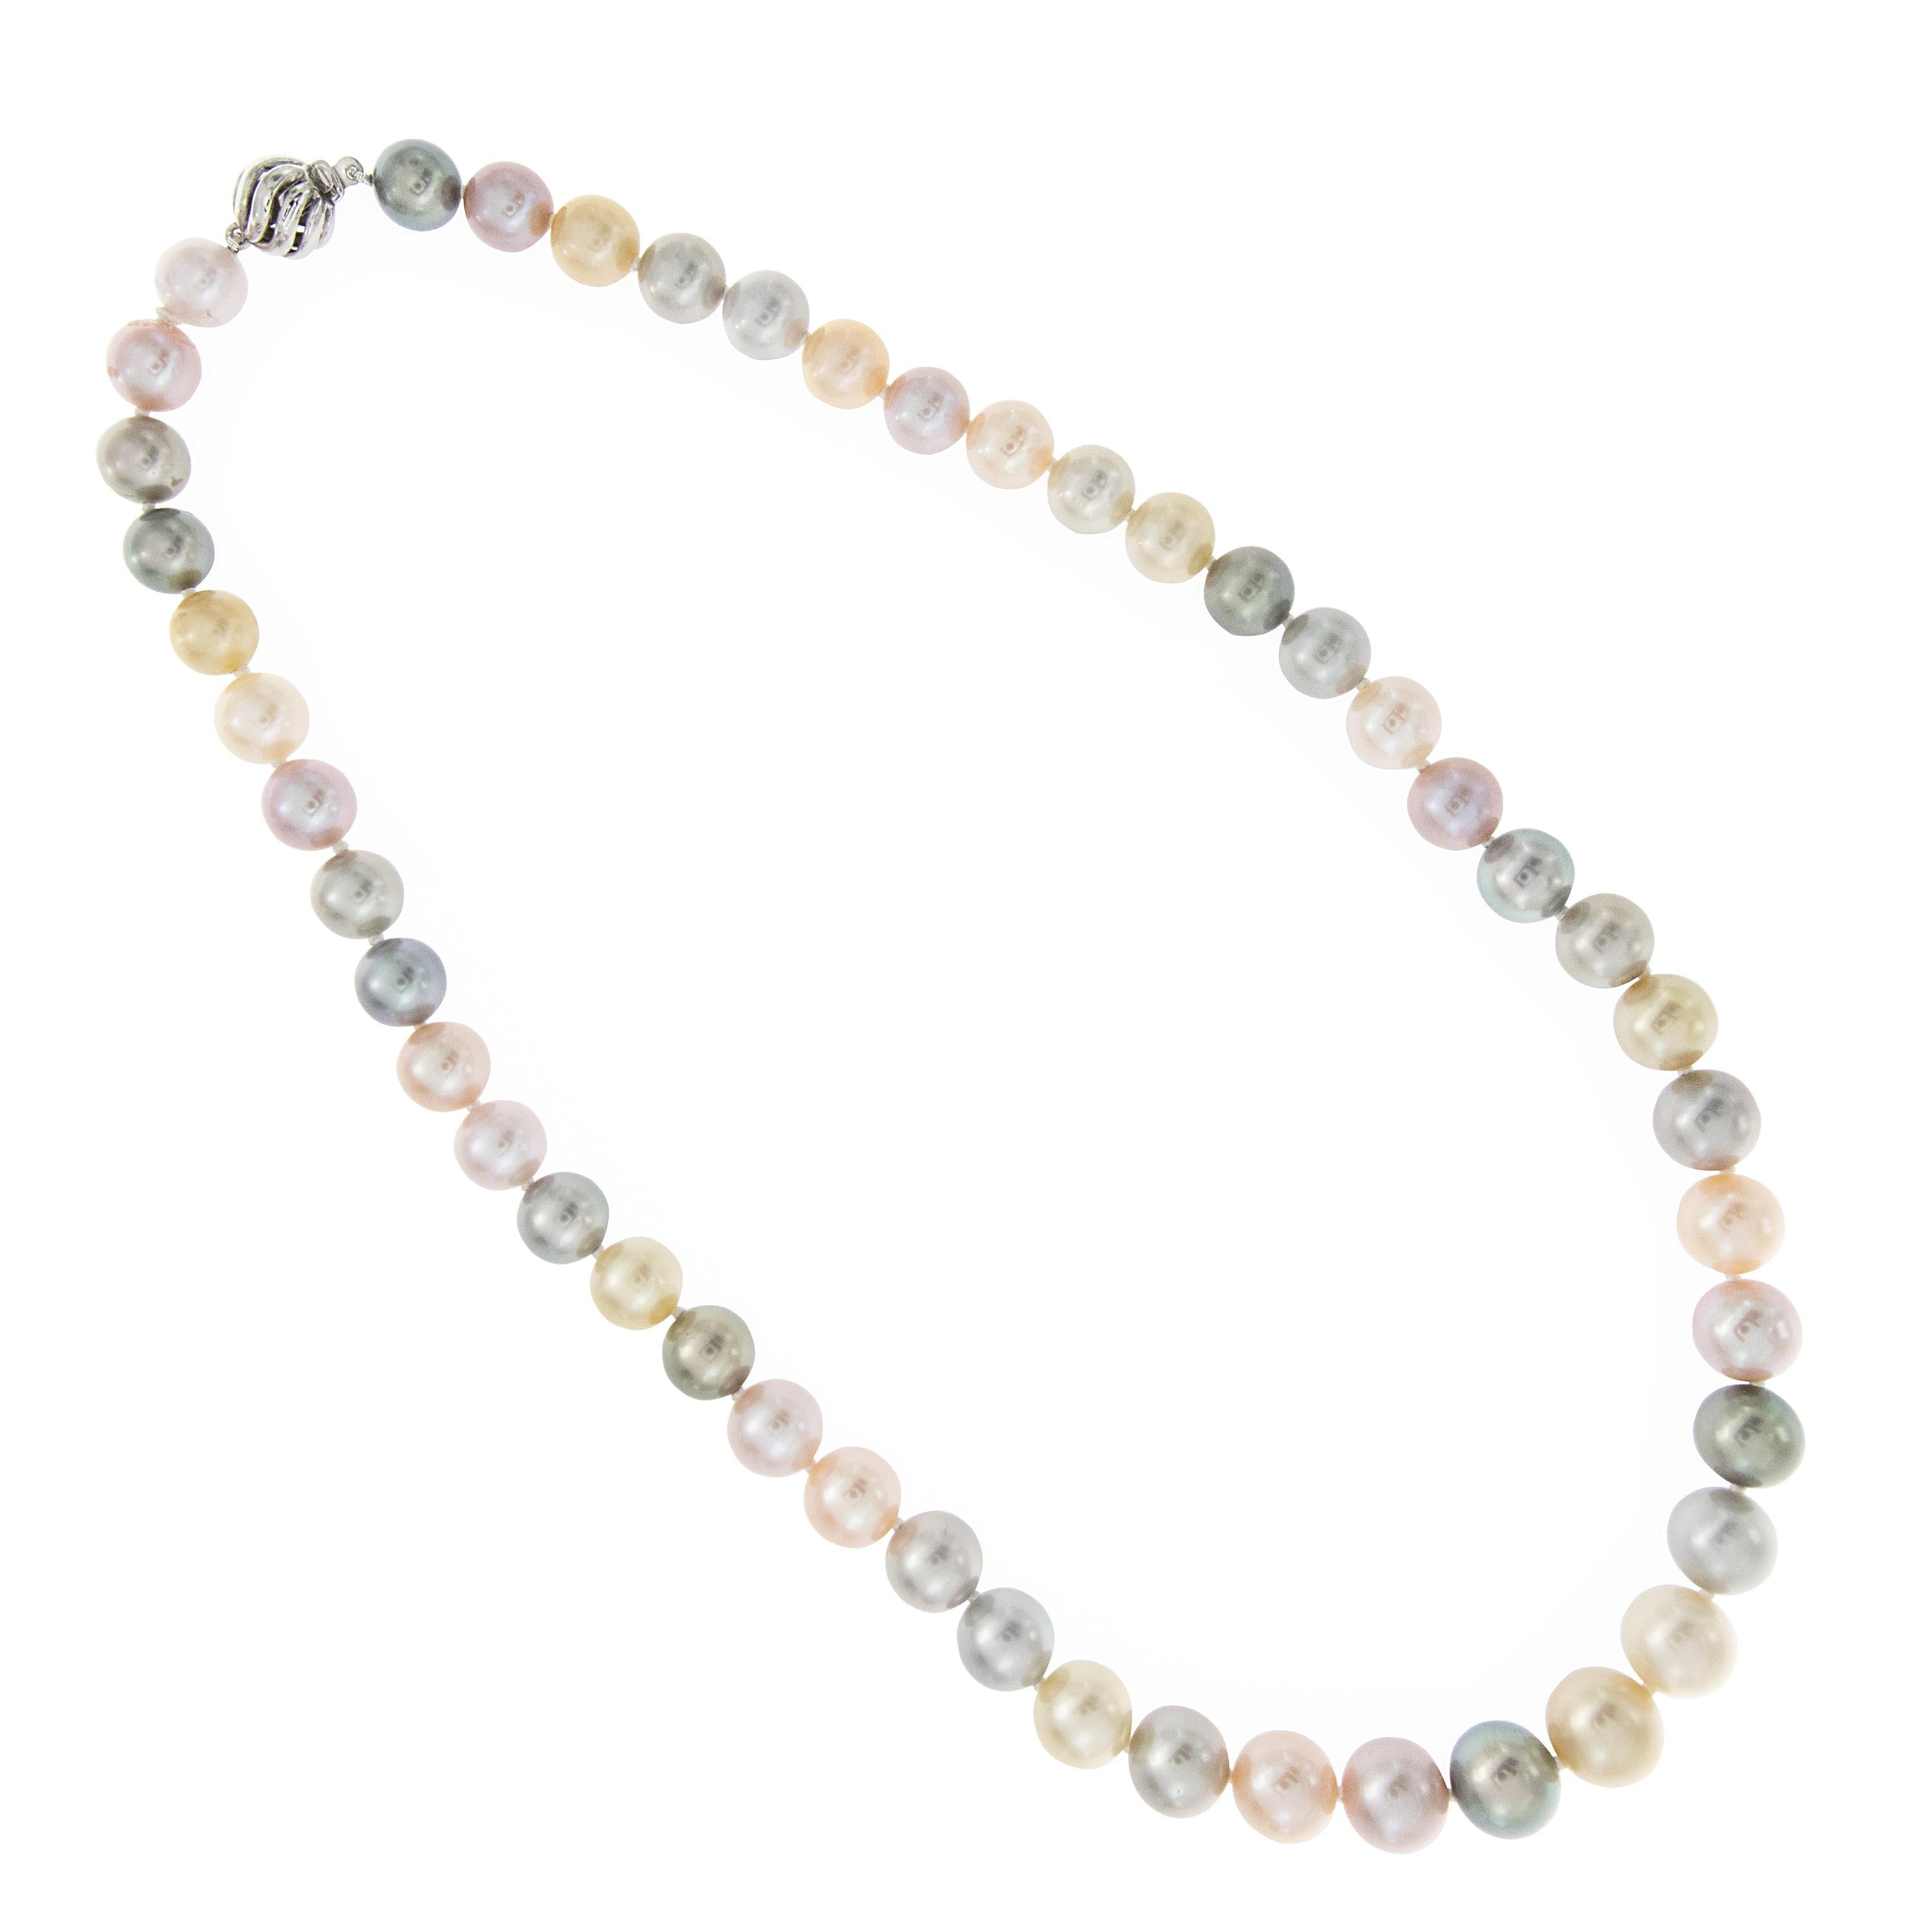 Pearls are trending & hot, hot, hot! Mixing South Sea pearls with freshwater pearls creates a stunning look for this 17.5